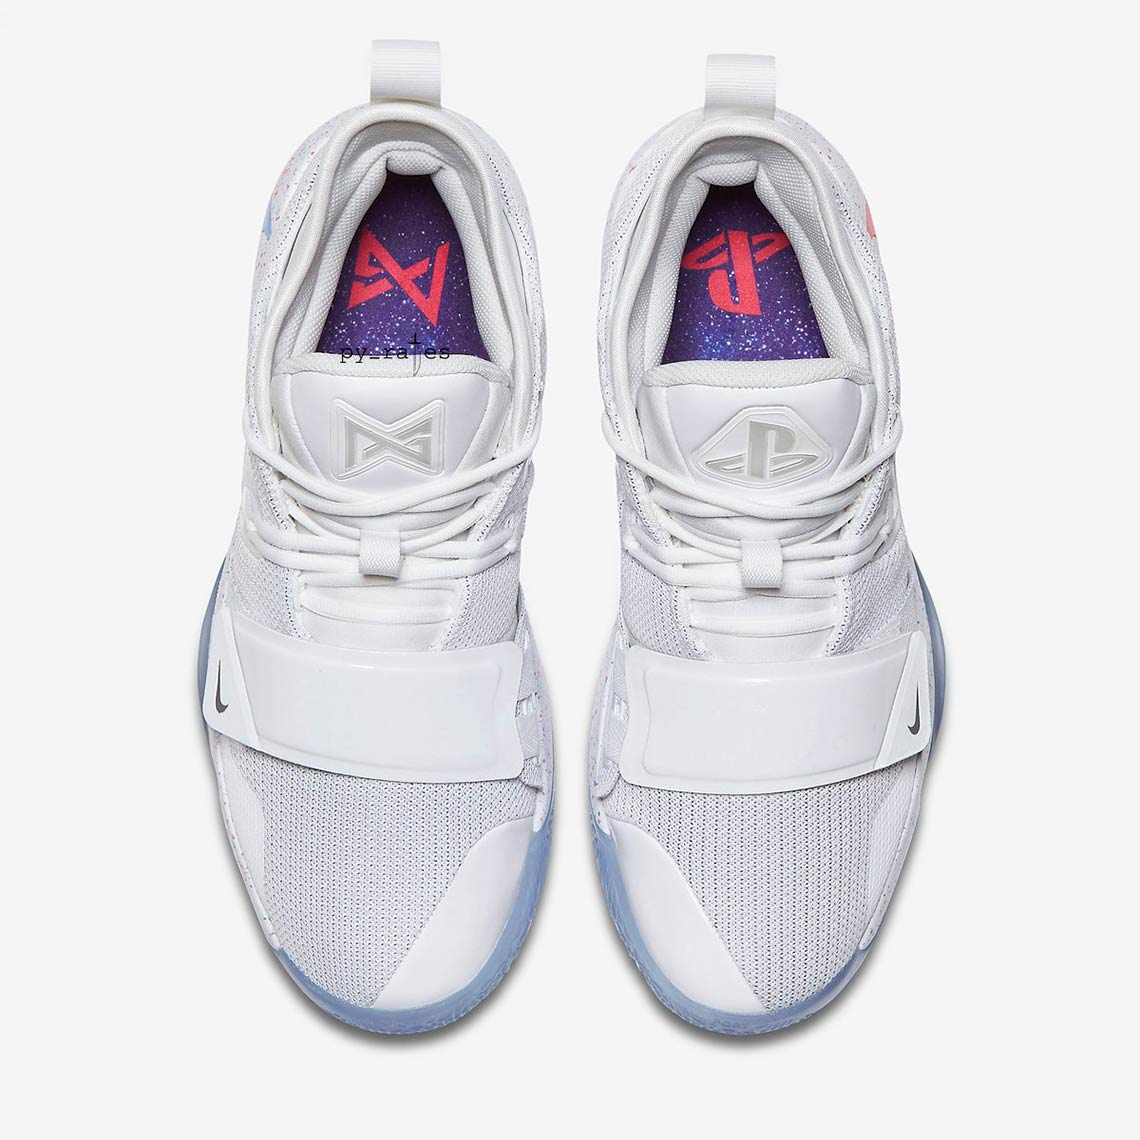 paul george shoes playstation price philippines